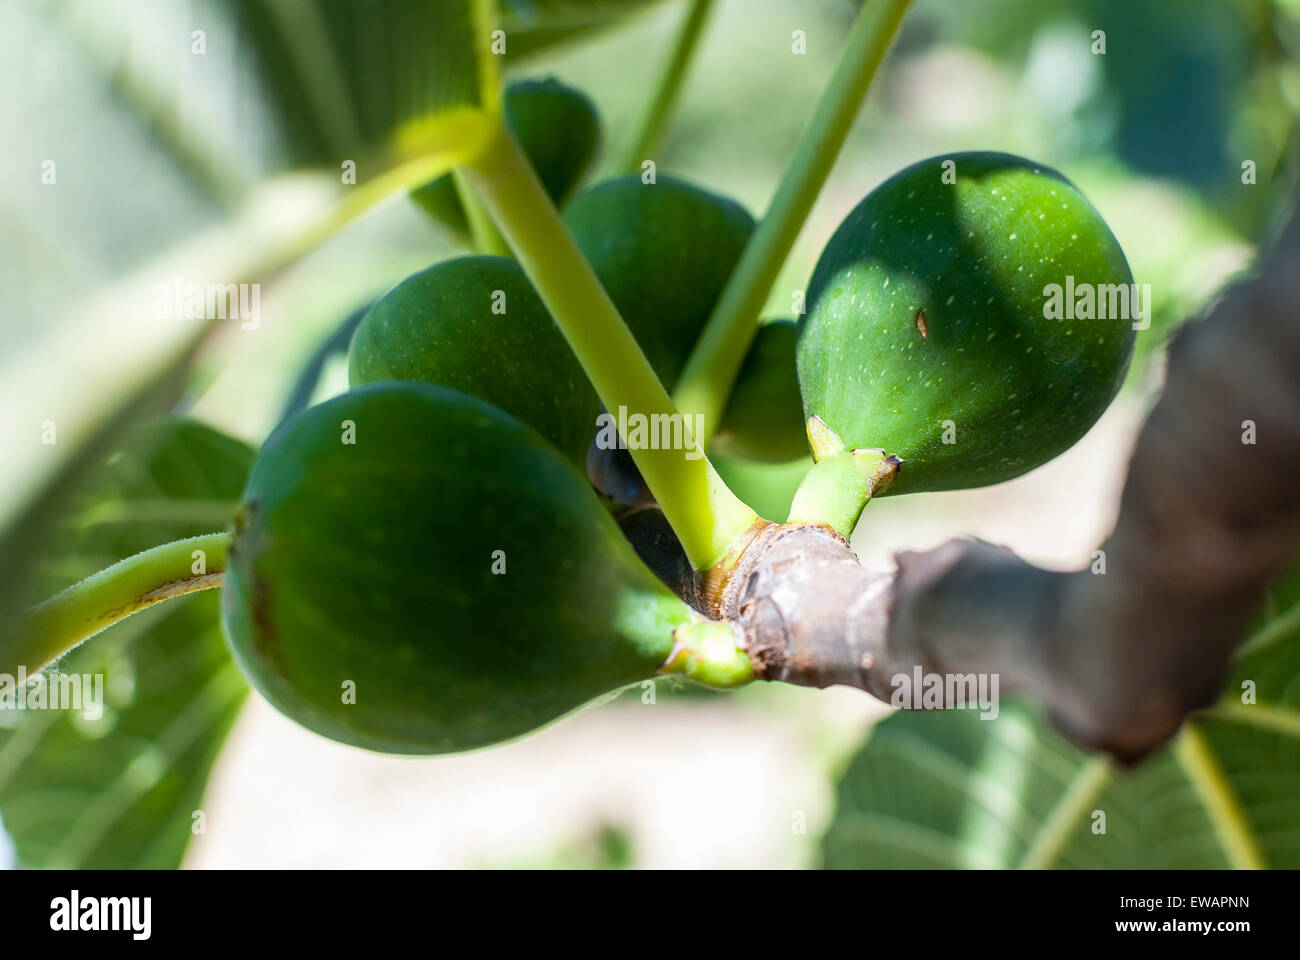 Green figs On Branch Closeup Stock Photo